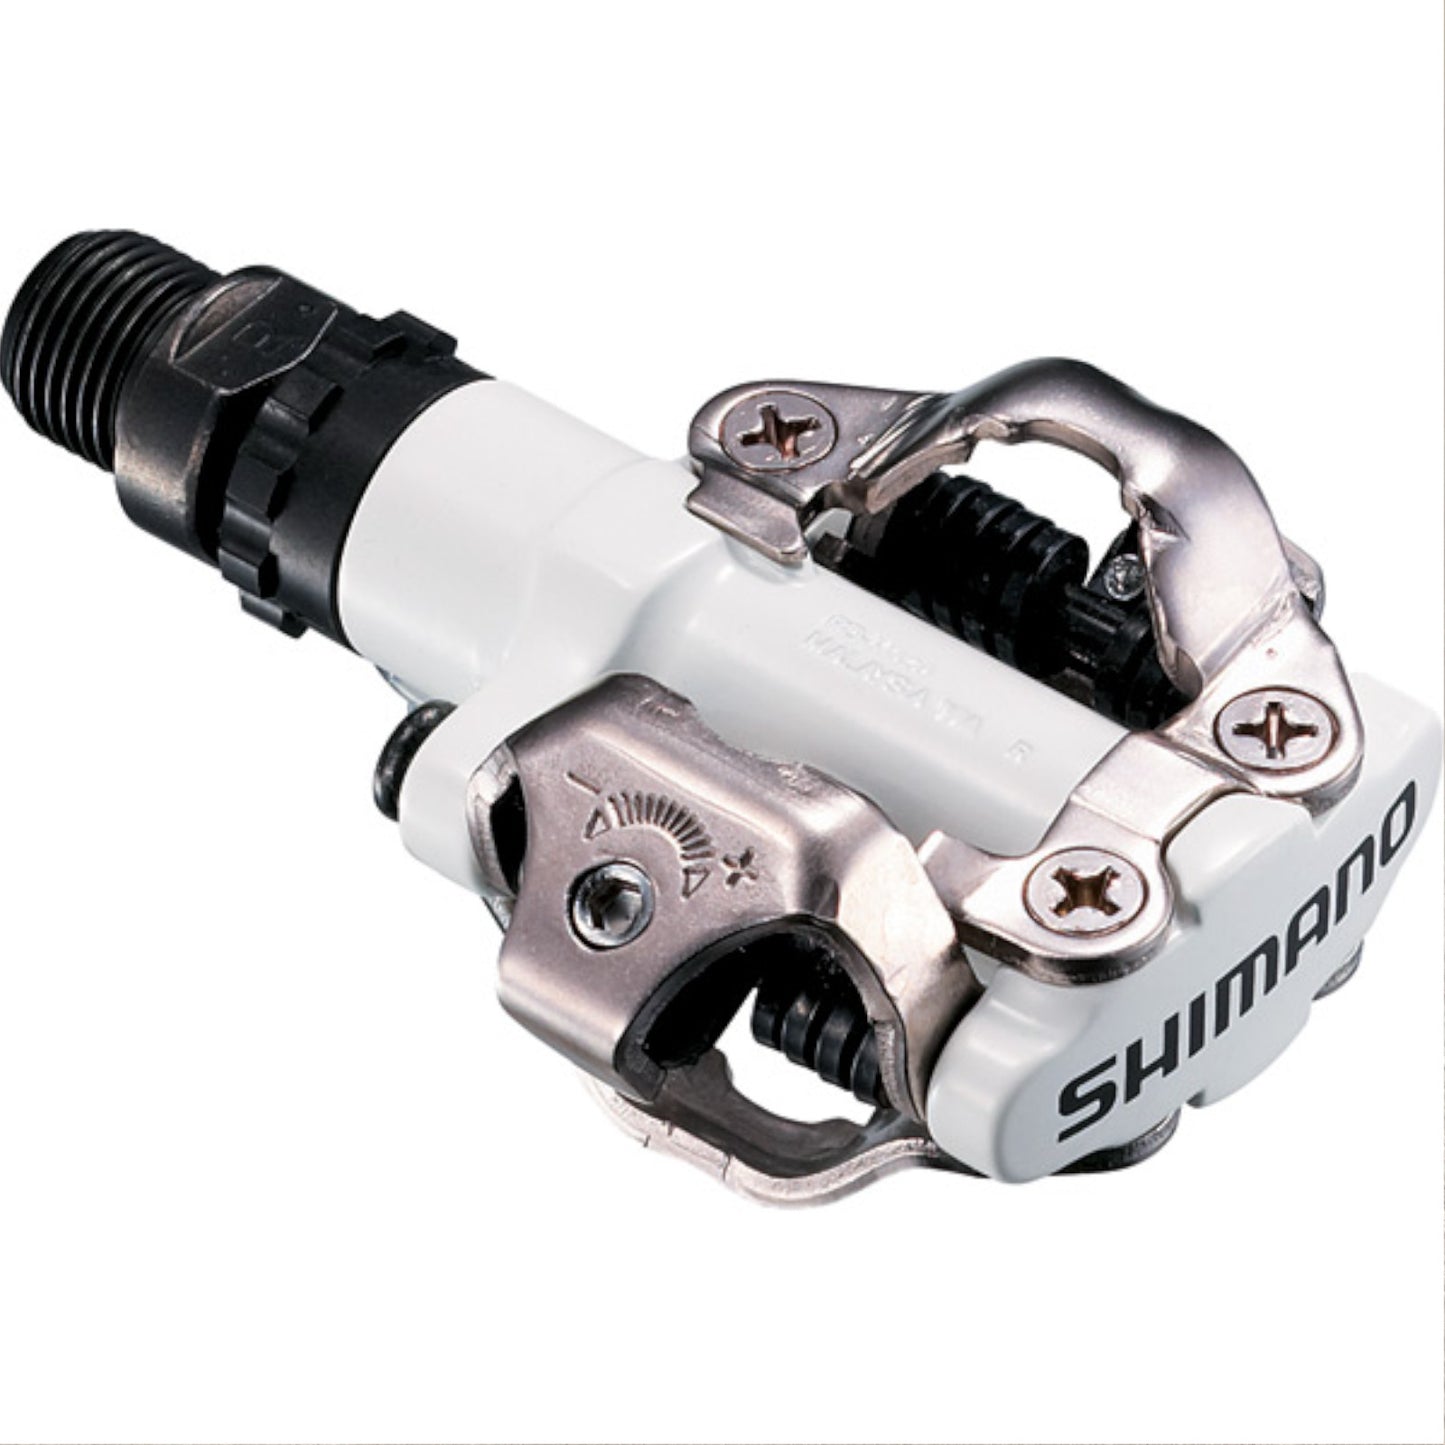 Shimano M520 White Two-Sided Shimano SPD Clipless Bike Pedals Alternate 1